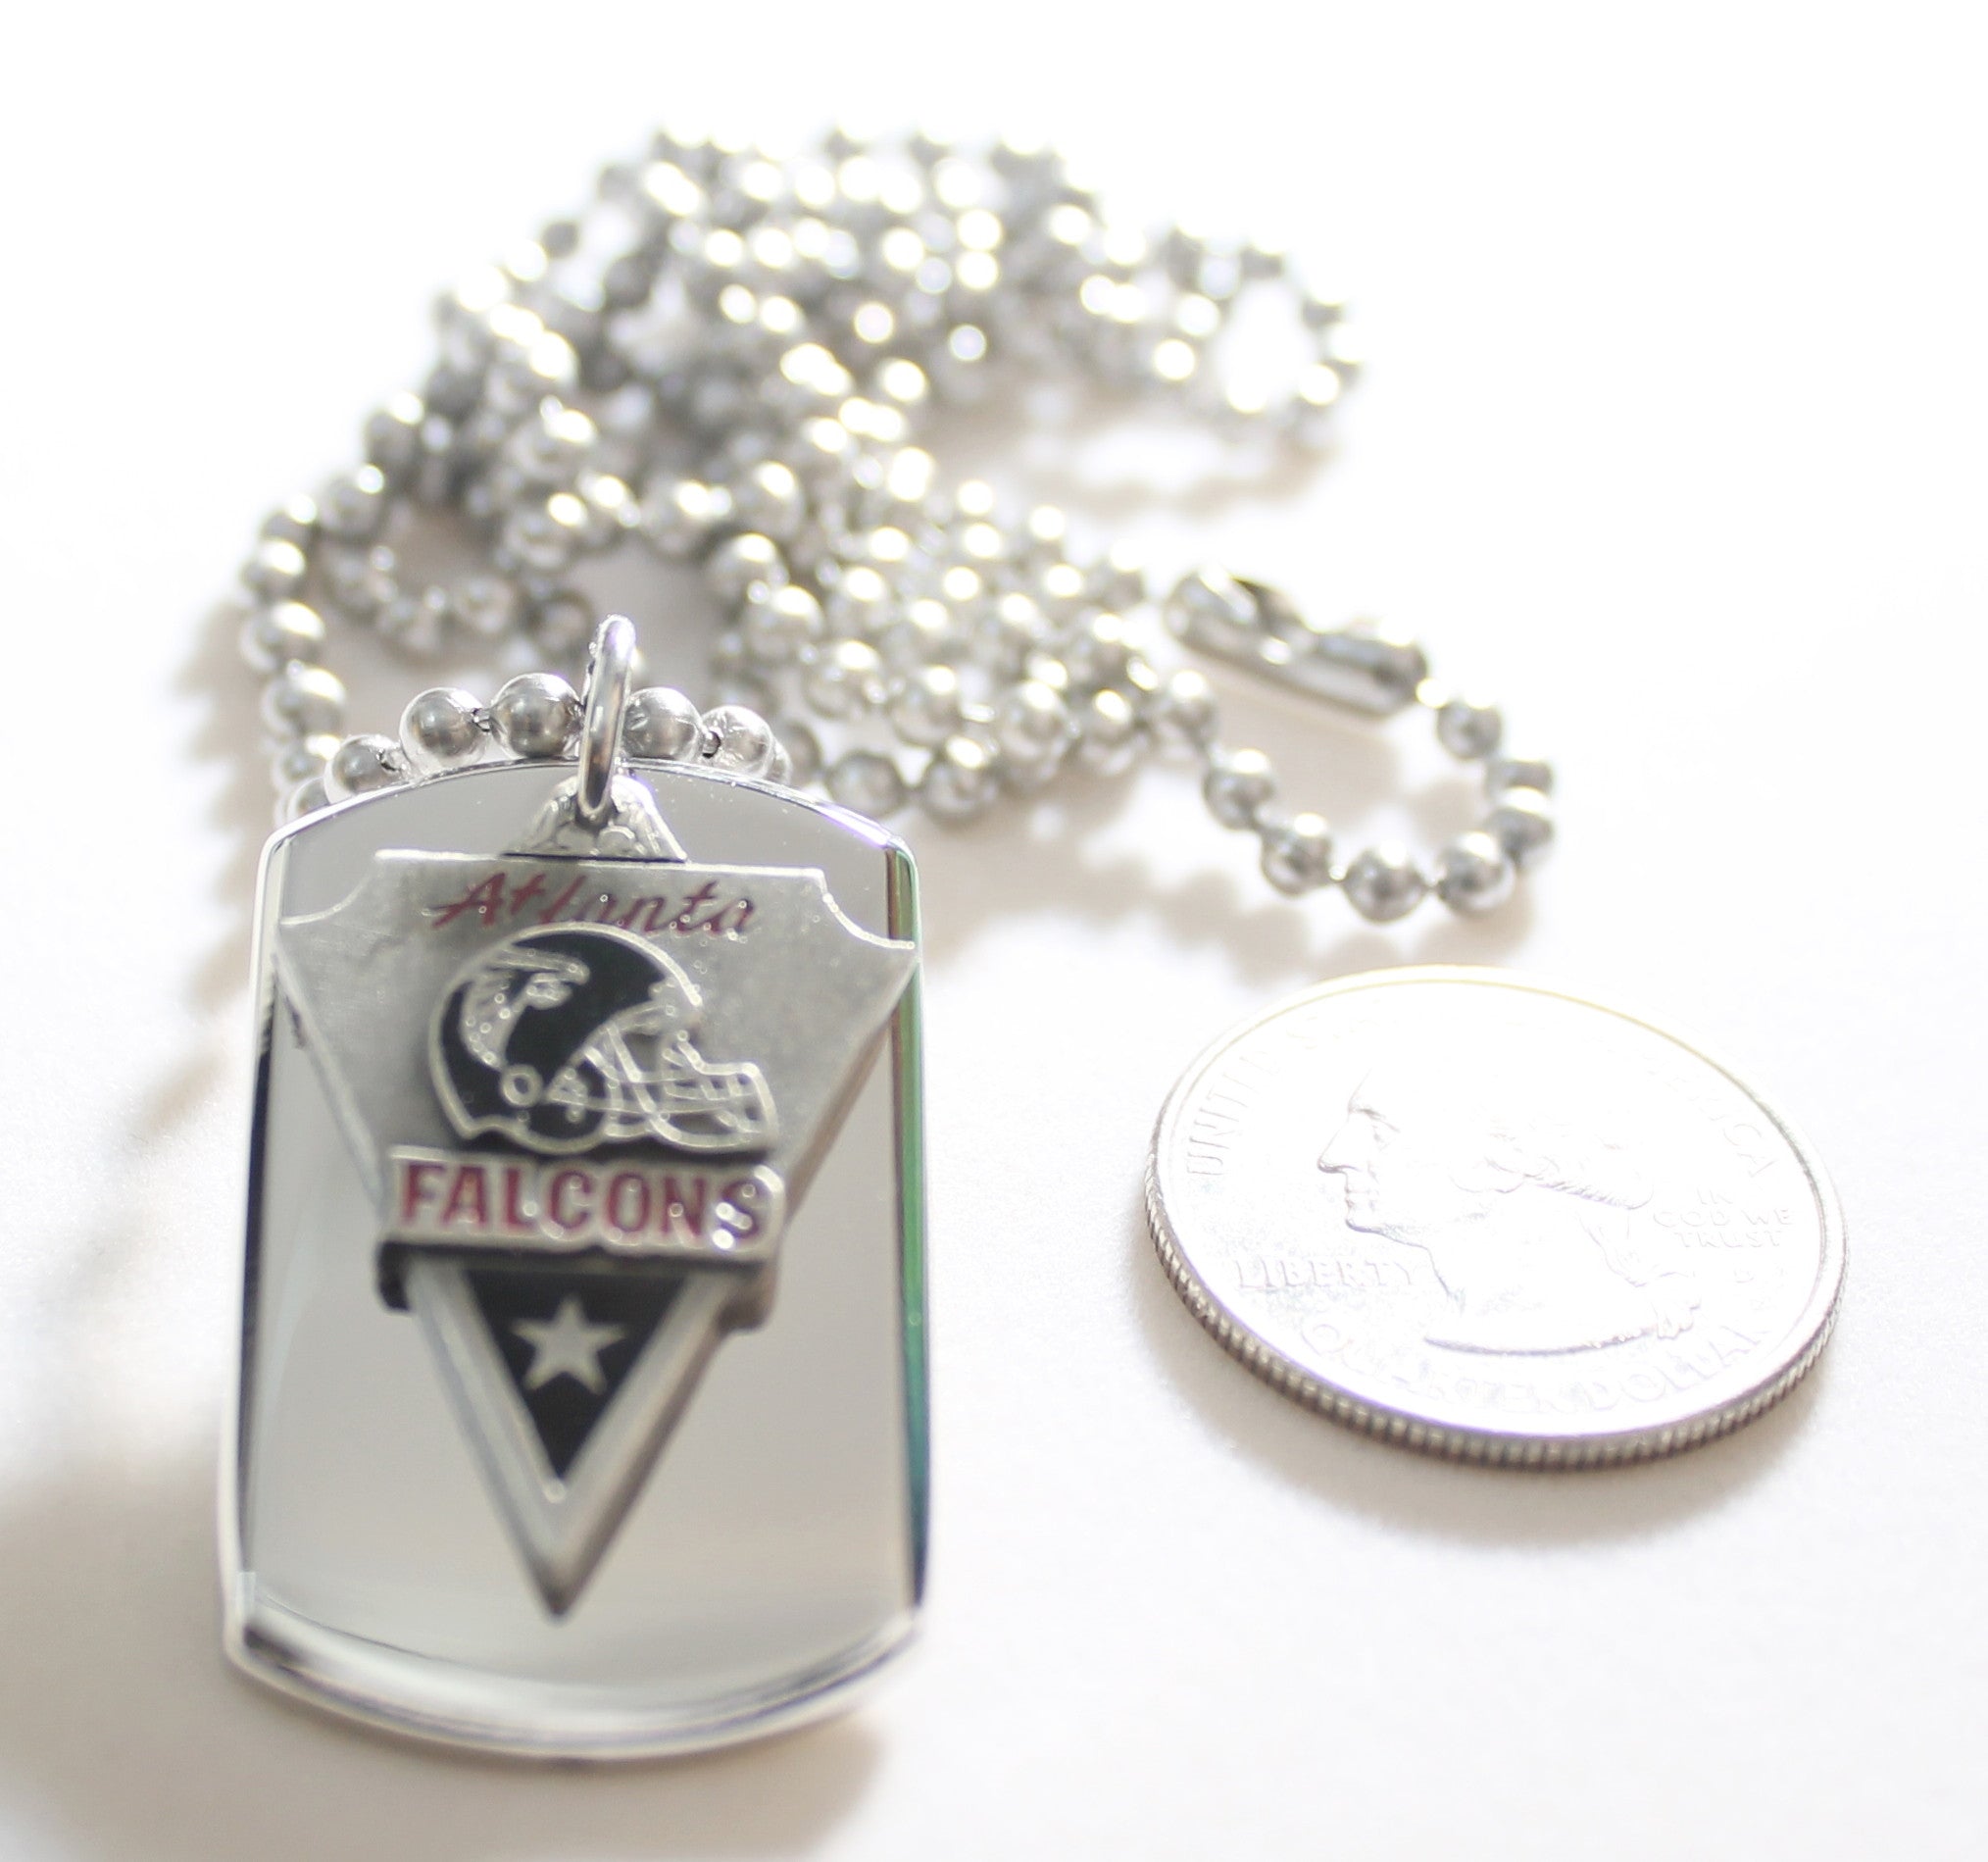 Atlanta Falcons NFL stainless steel dog tag necklace 3D ball chain pendant - Samstagsandmore